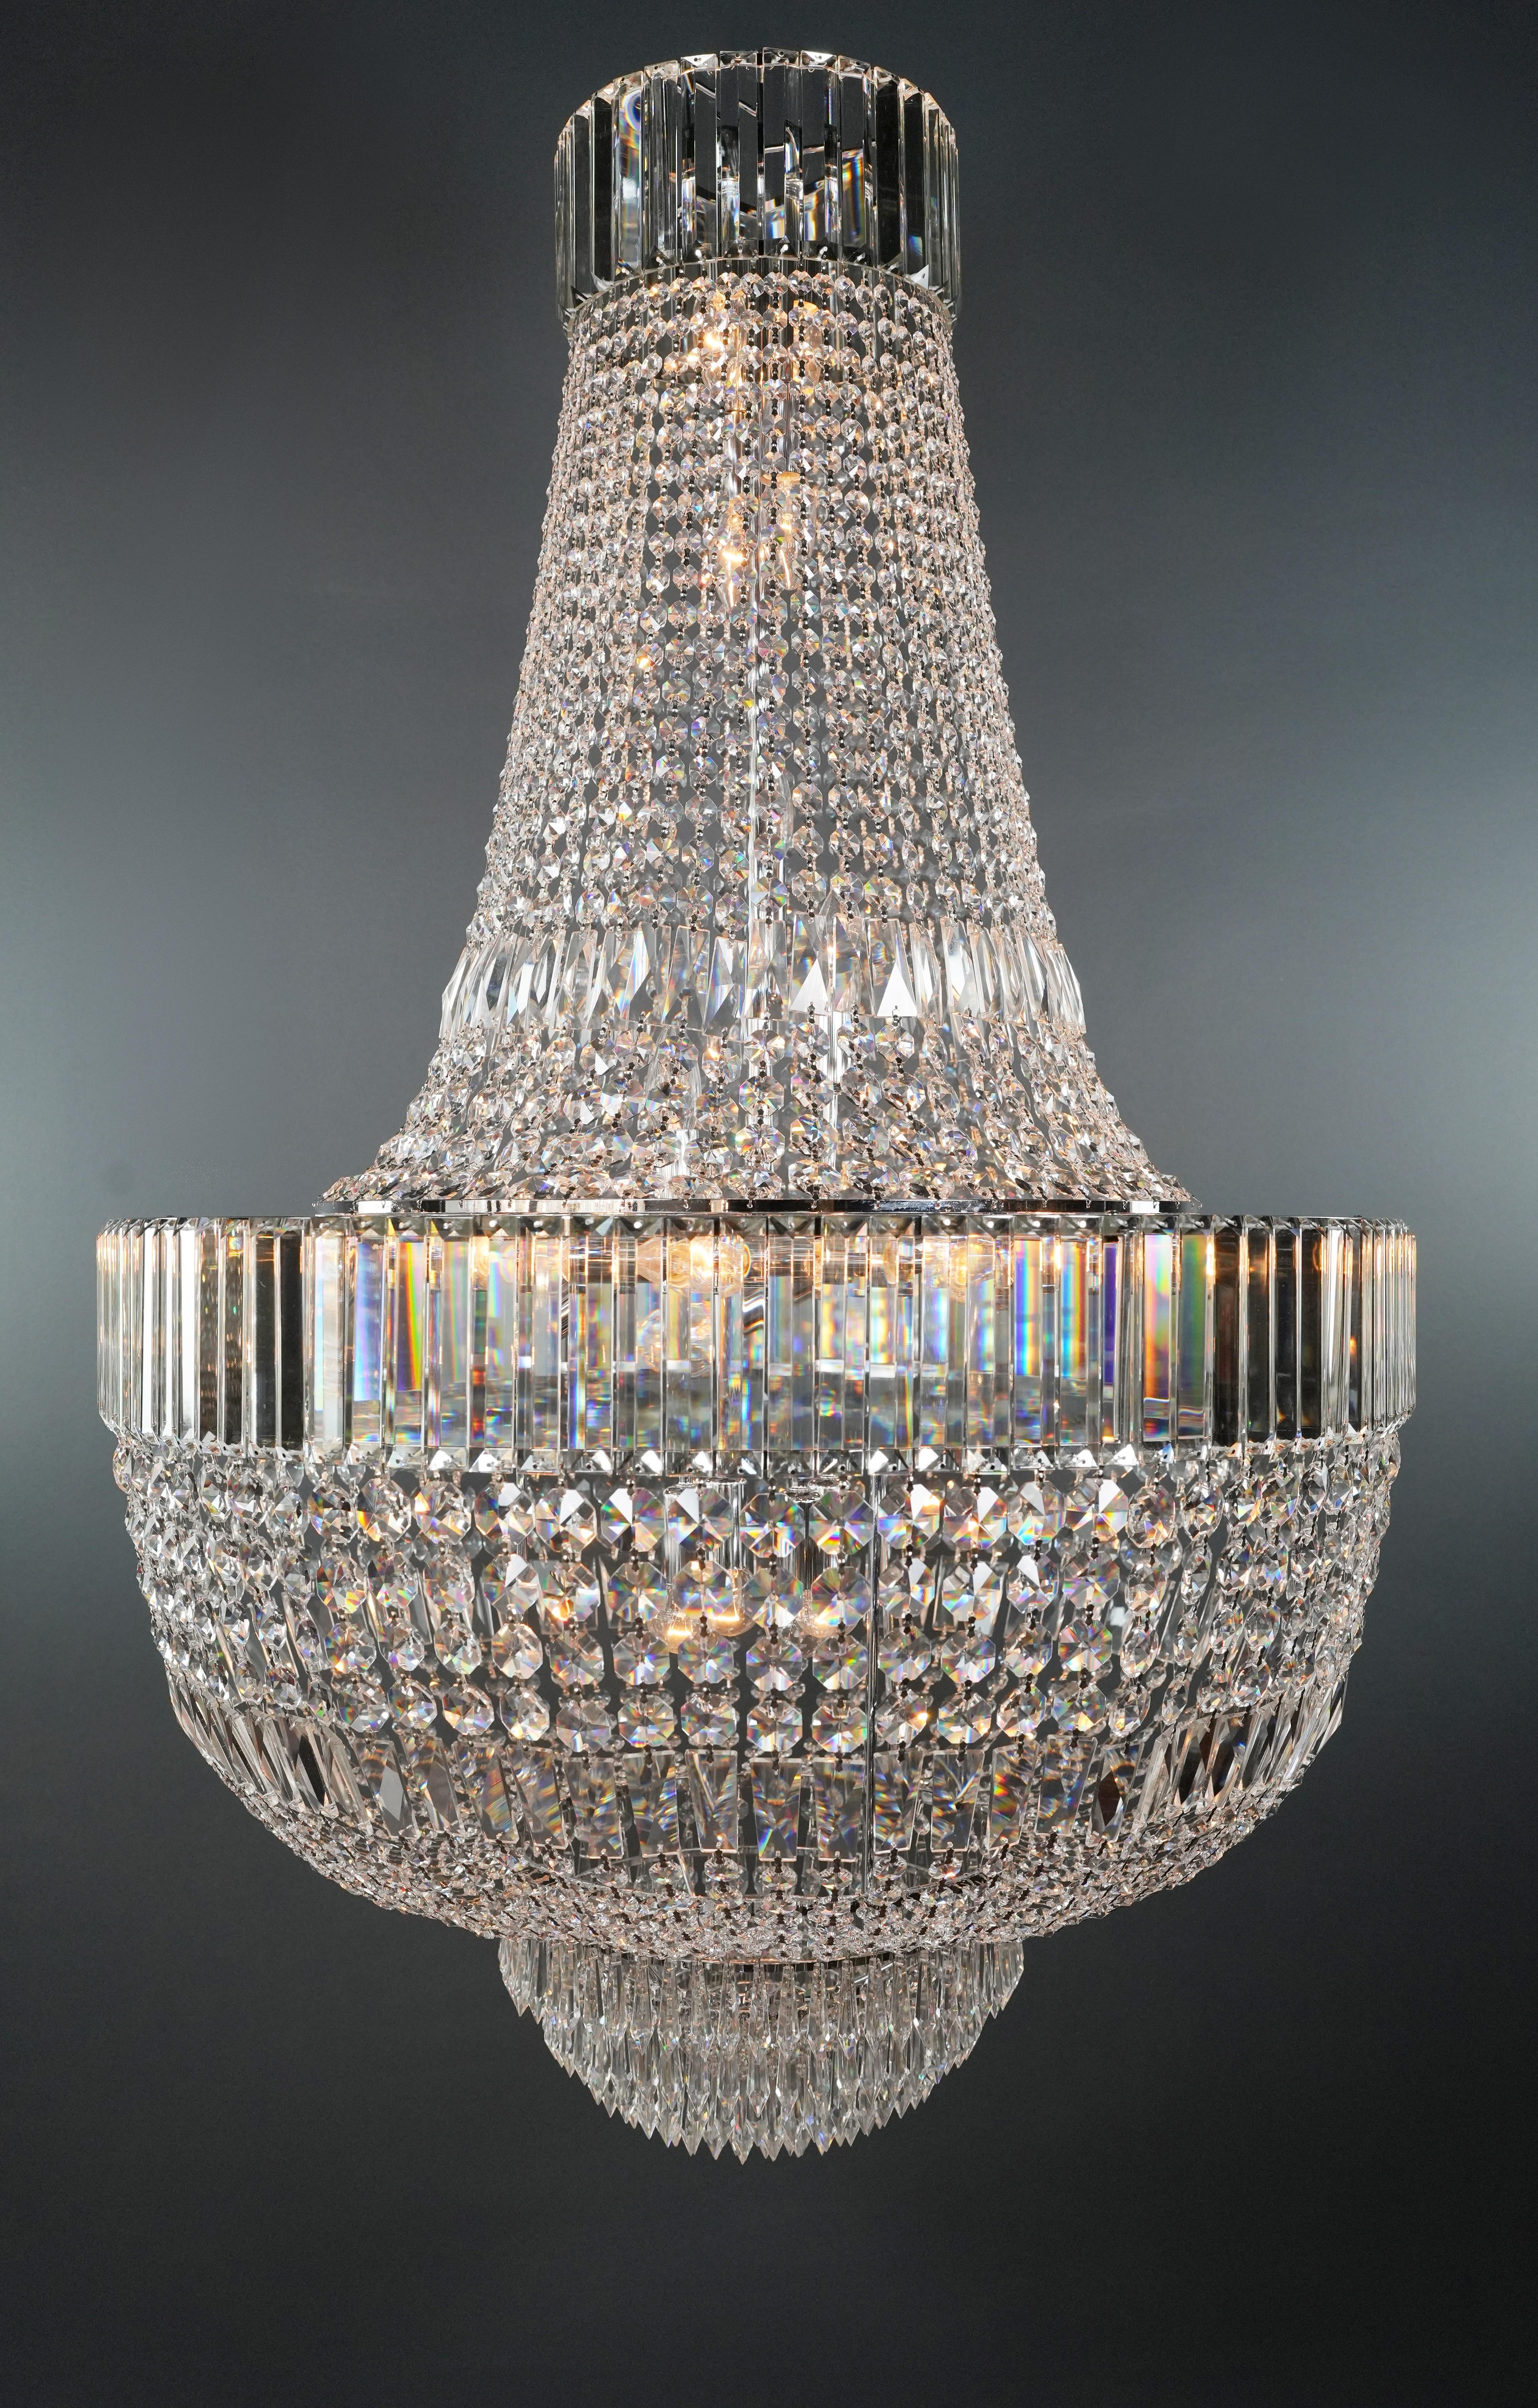 Introducing a new Art Deco crystal style chandelier that captures the grandeur of the Empire era while offering modern sophistication. Crafted with exquisite lead crystal, this chandelier is the result of meticulous in-house production, ensuring the